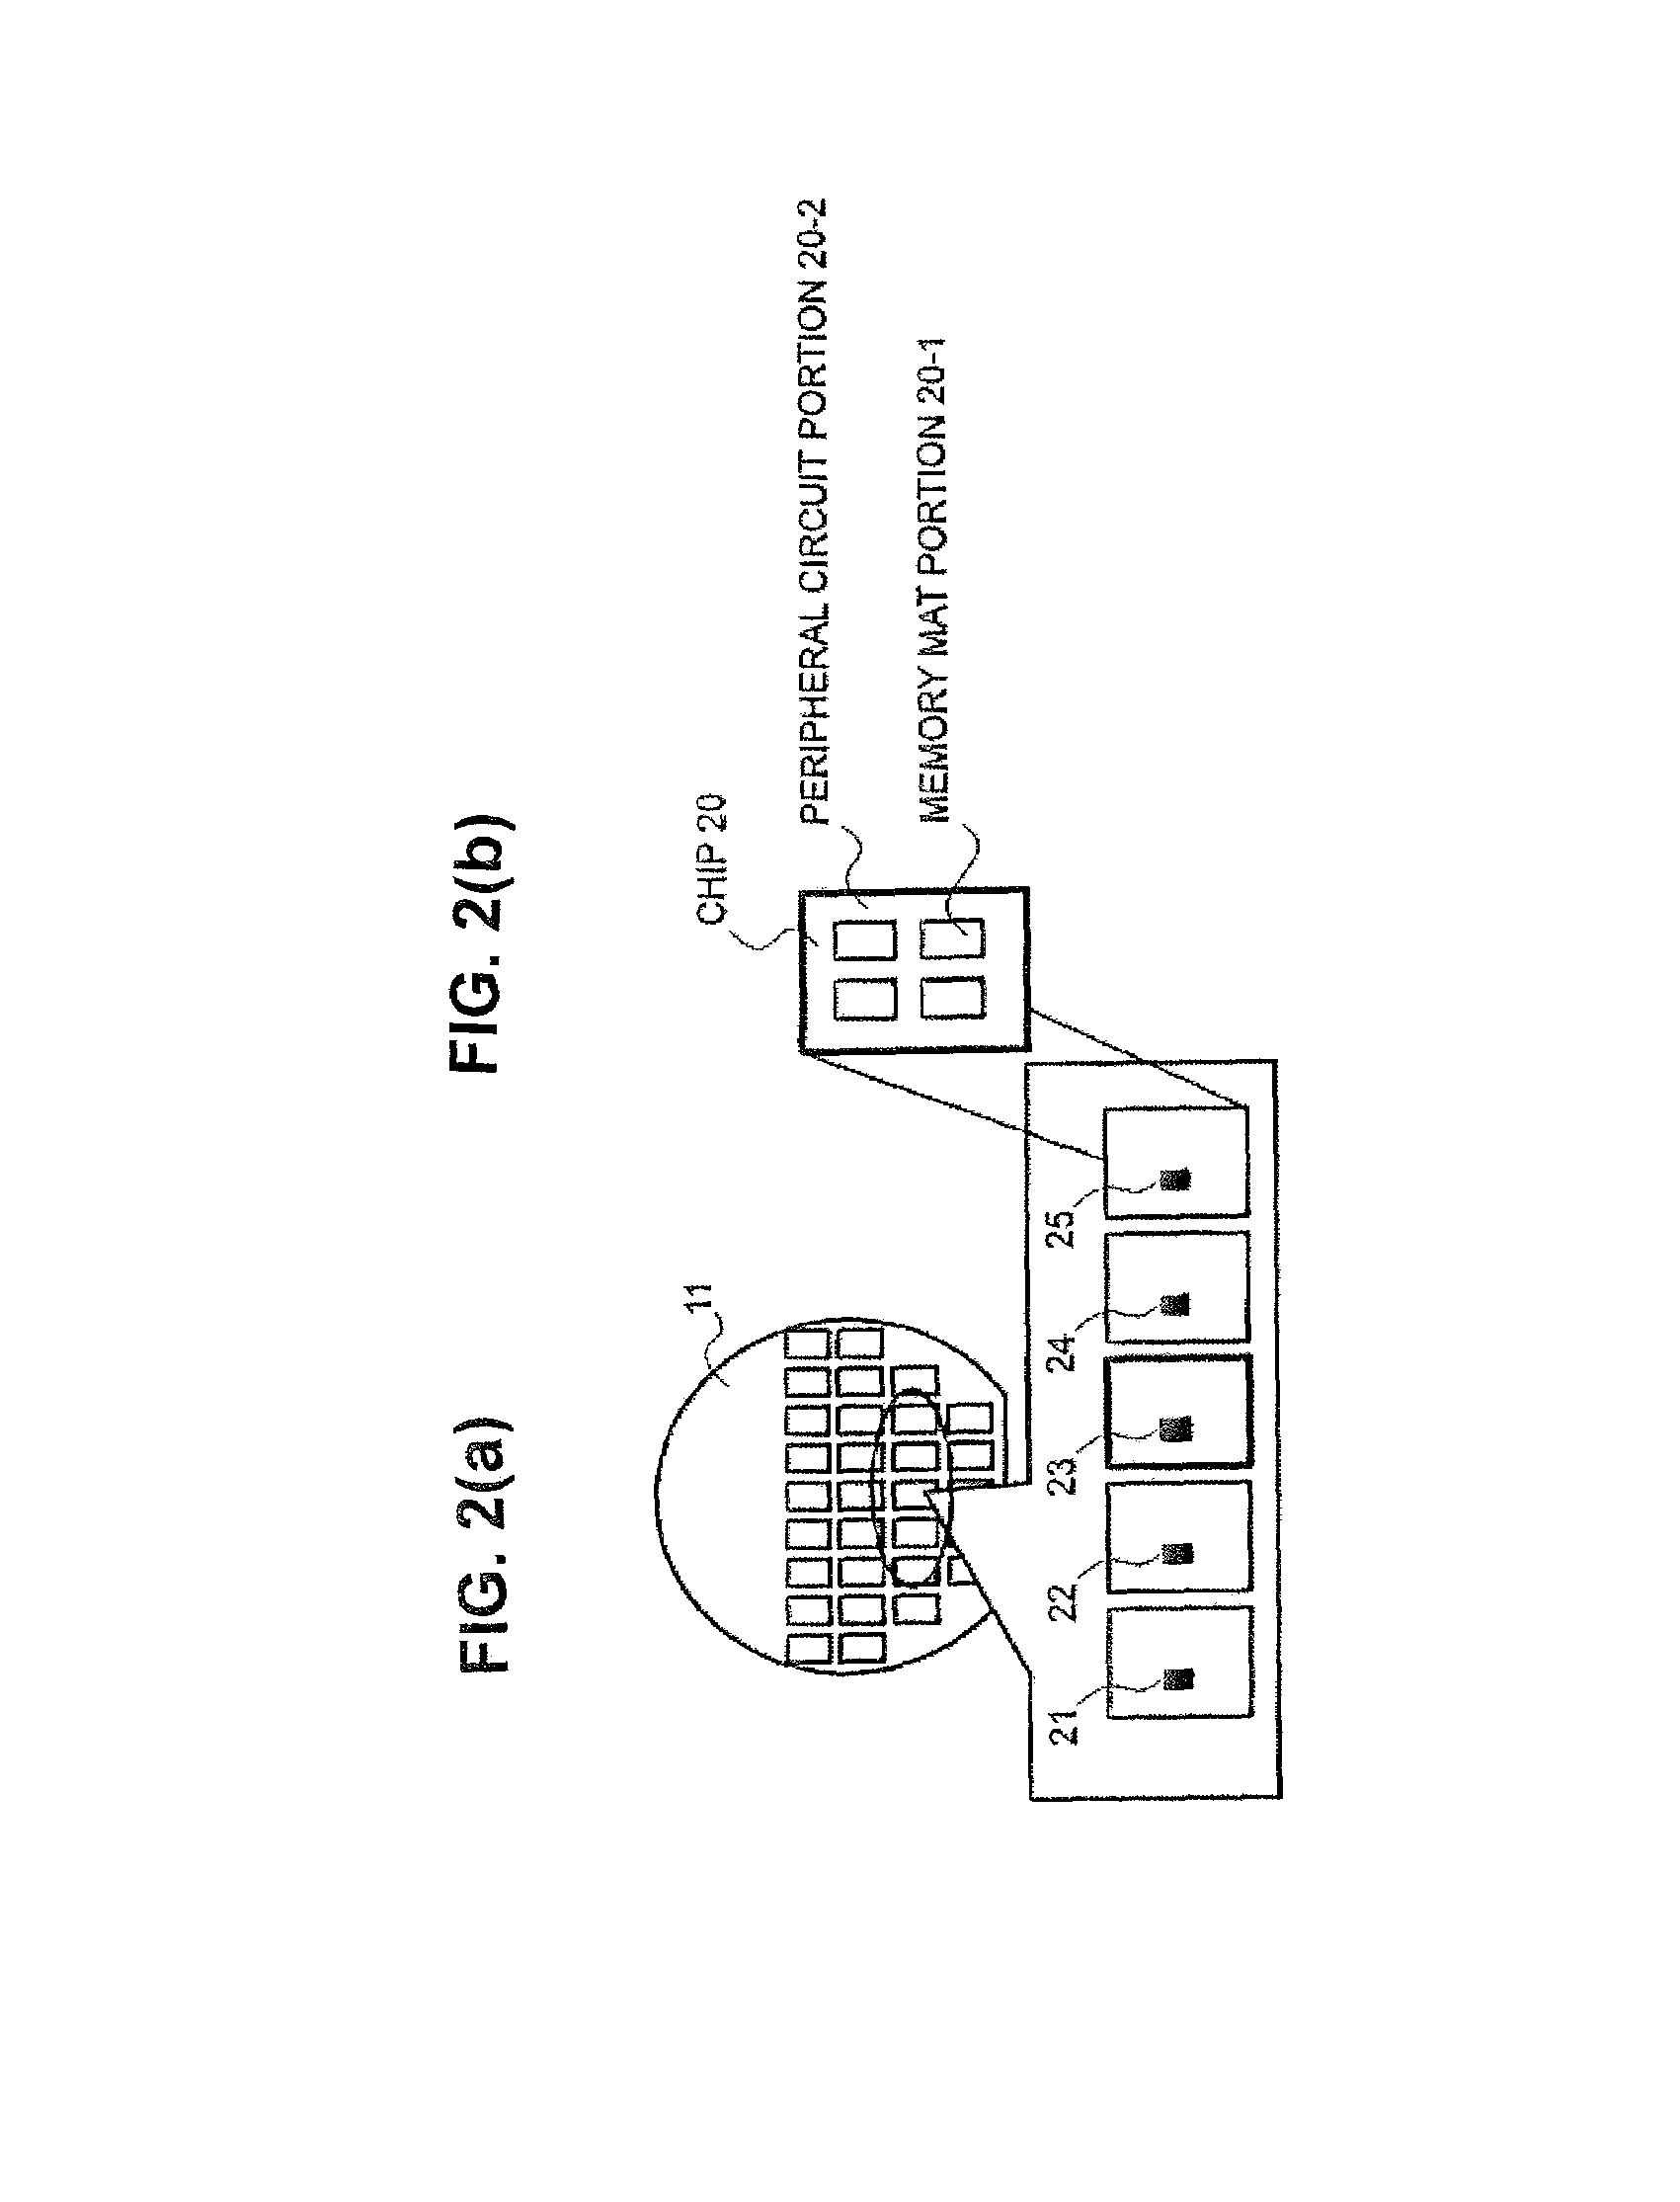 Defect inspection method and apparatus